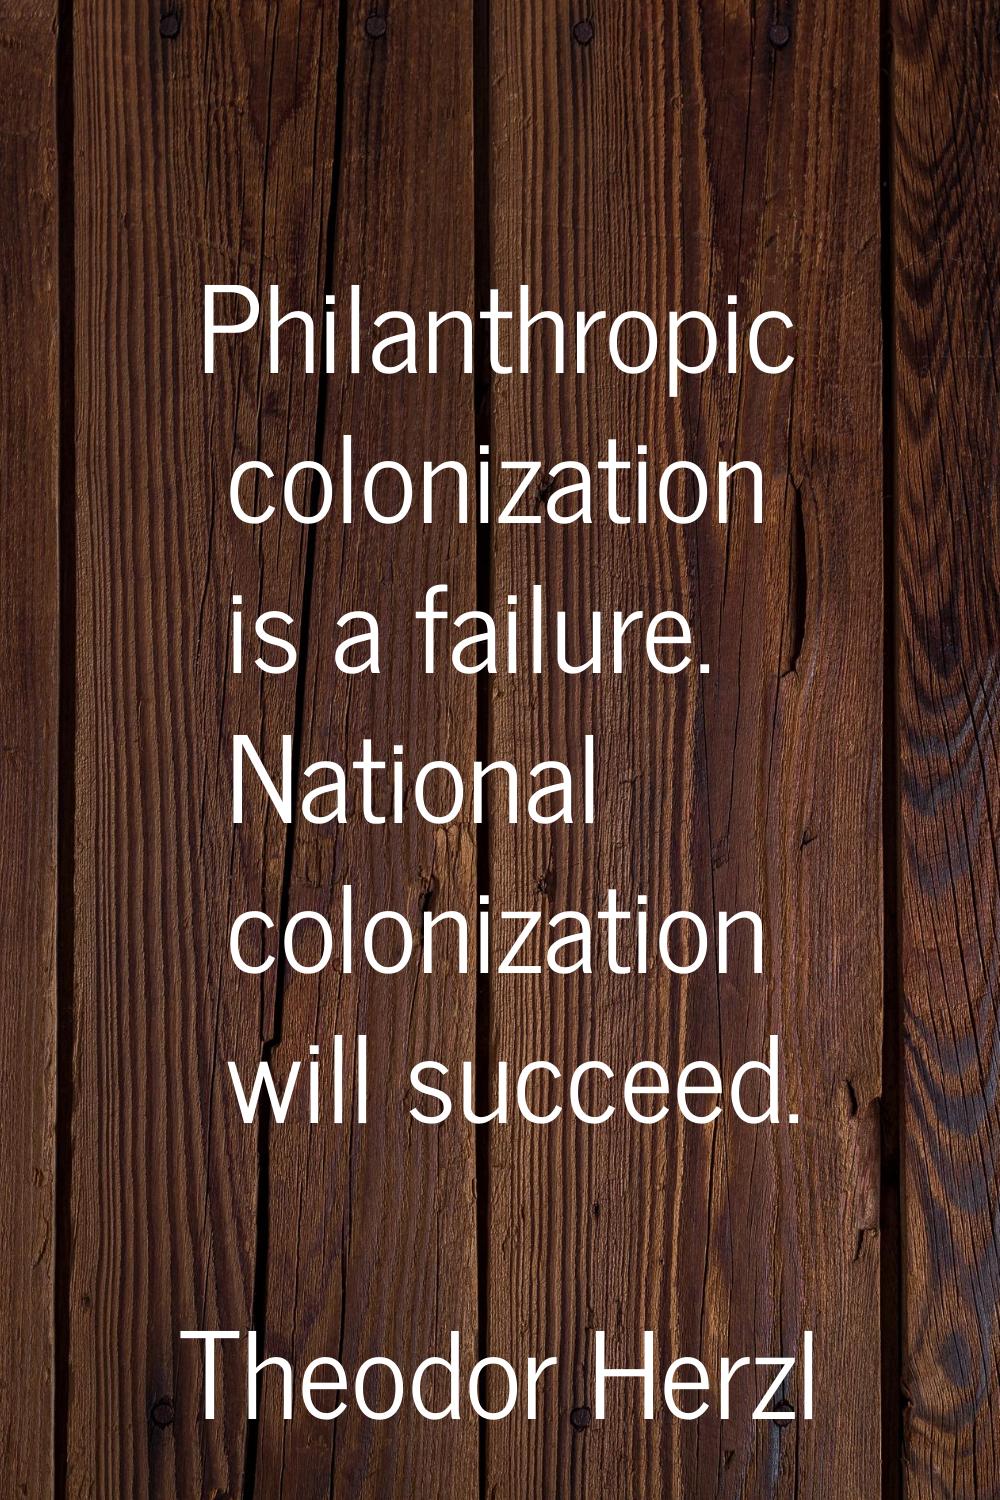 Philanthropic colonization is a failure. National colonization will succeed.